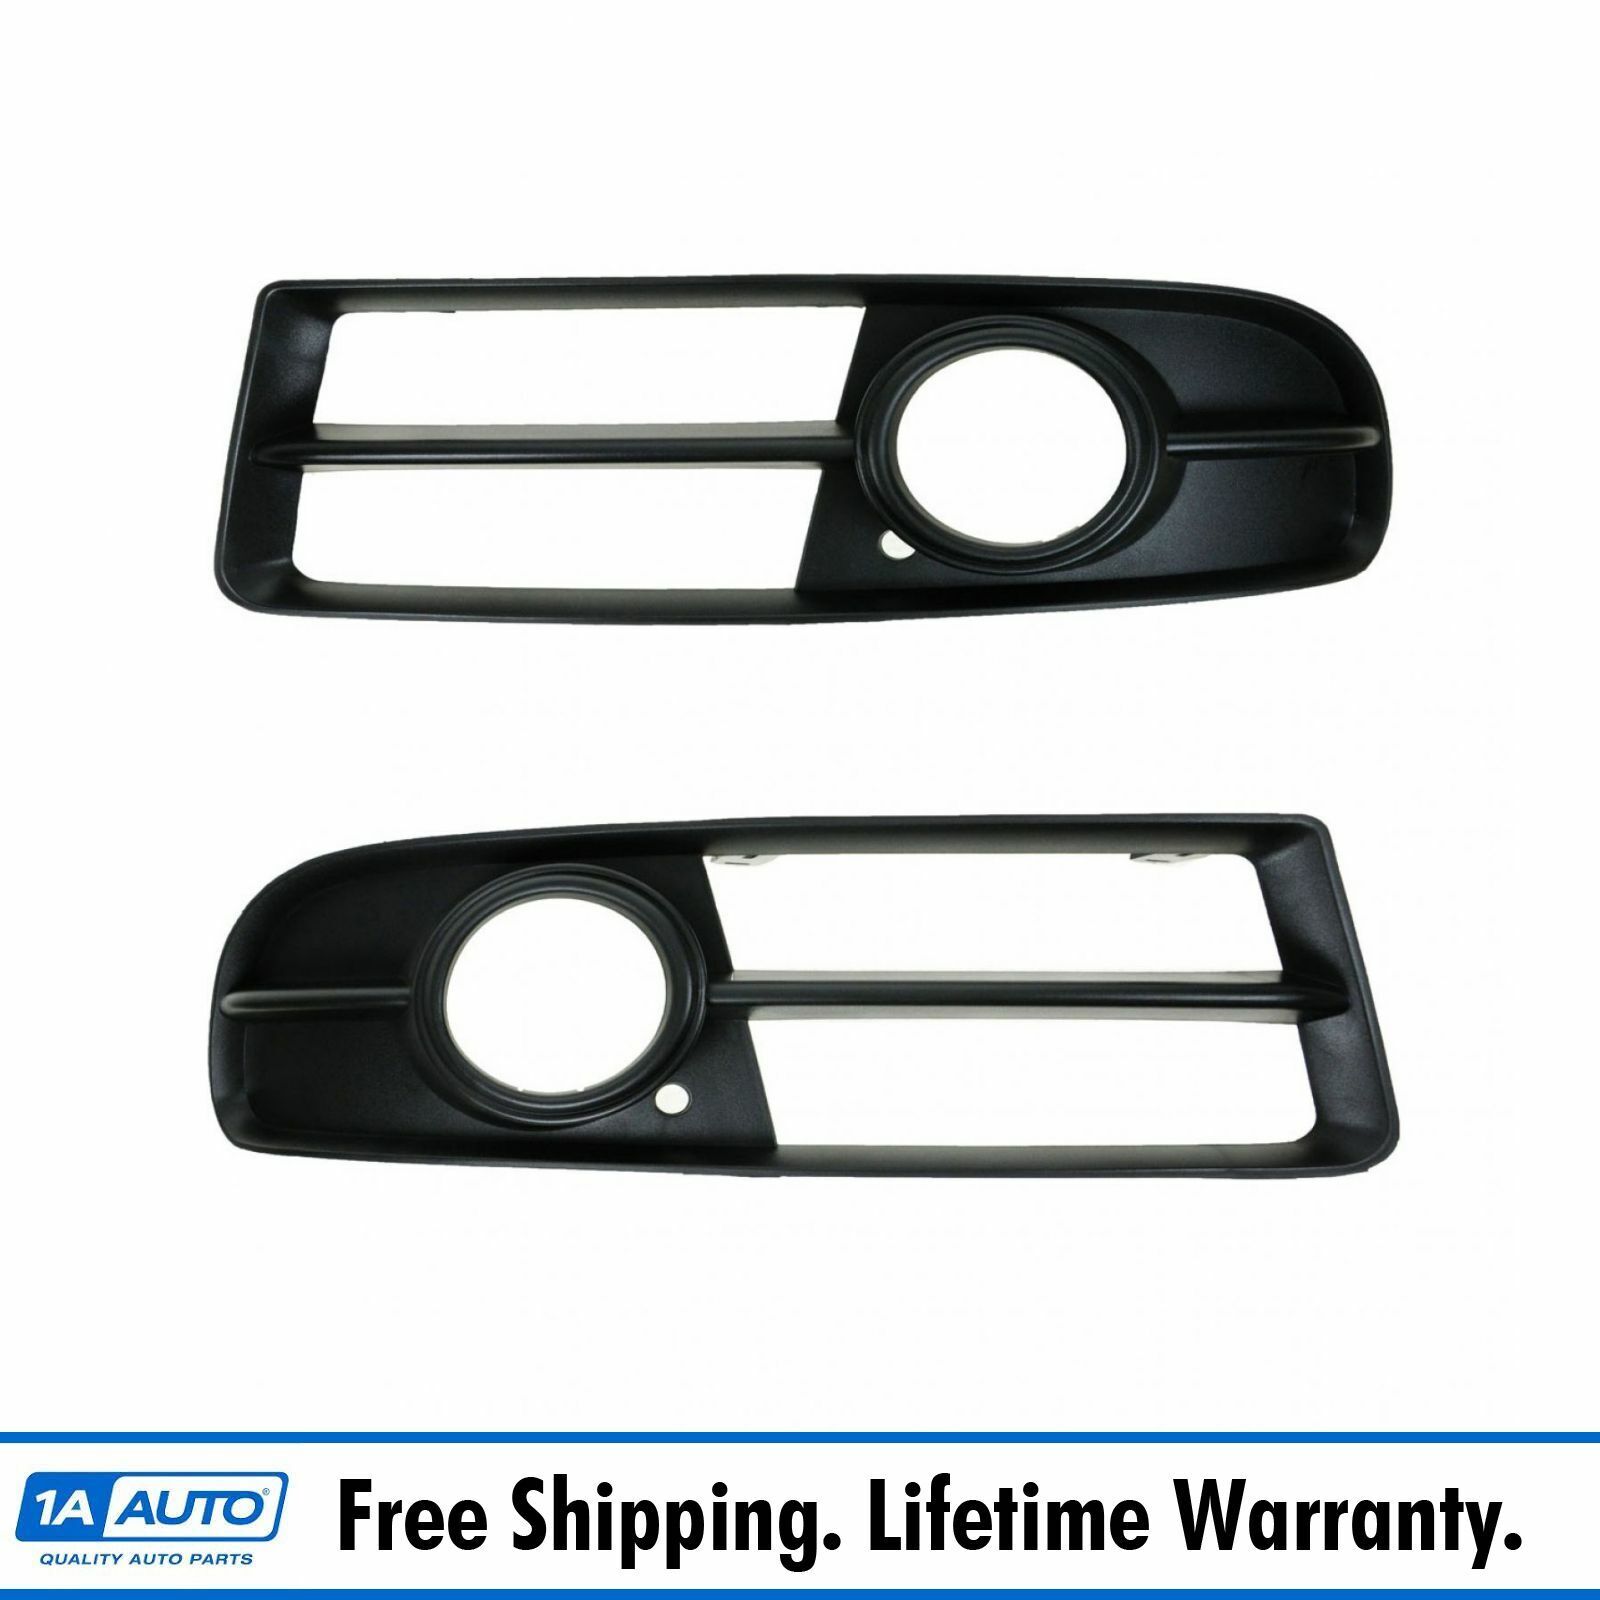 Front Bumper Mounted Lower Grille Pair Set of 2 for Audi A4 S4 Convertible